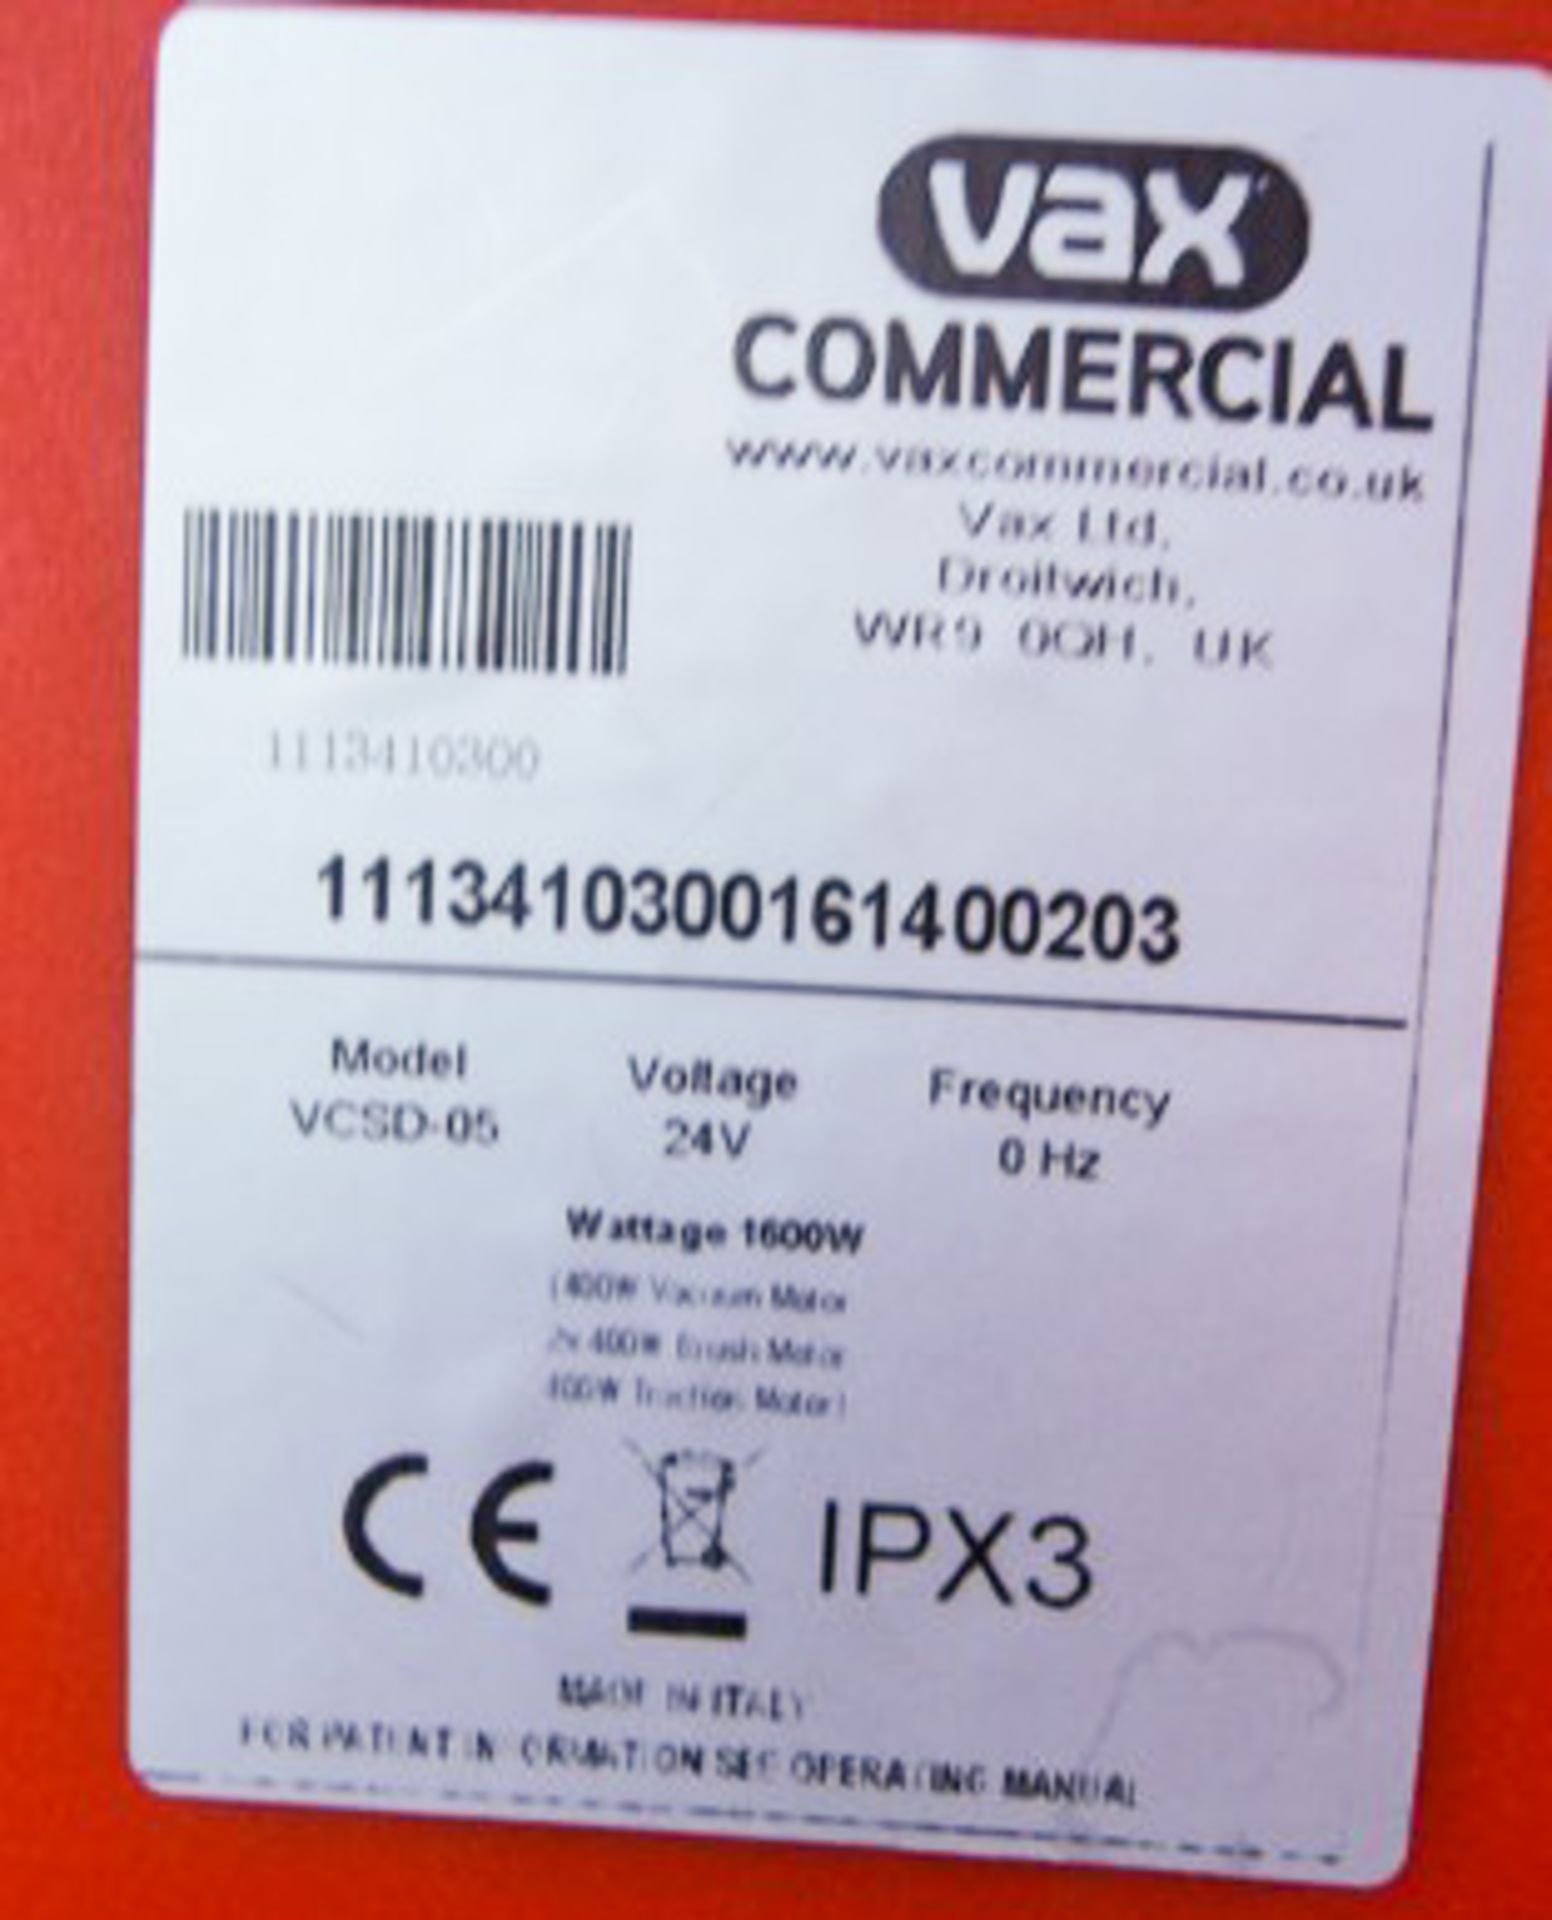 VAX VCSD-05 commercial floor cleaner, mains charger. 123hrs (not verified) - Image 2 of 8